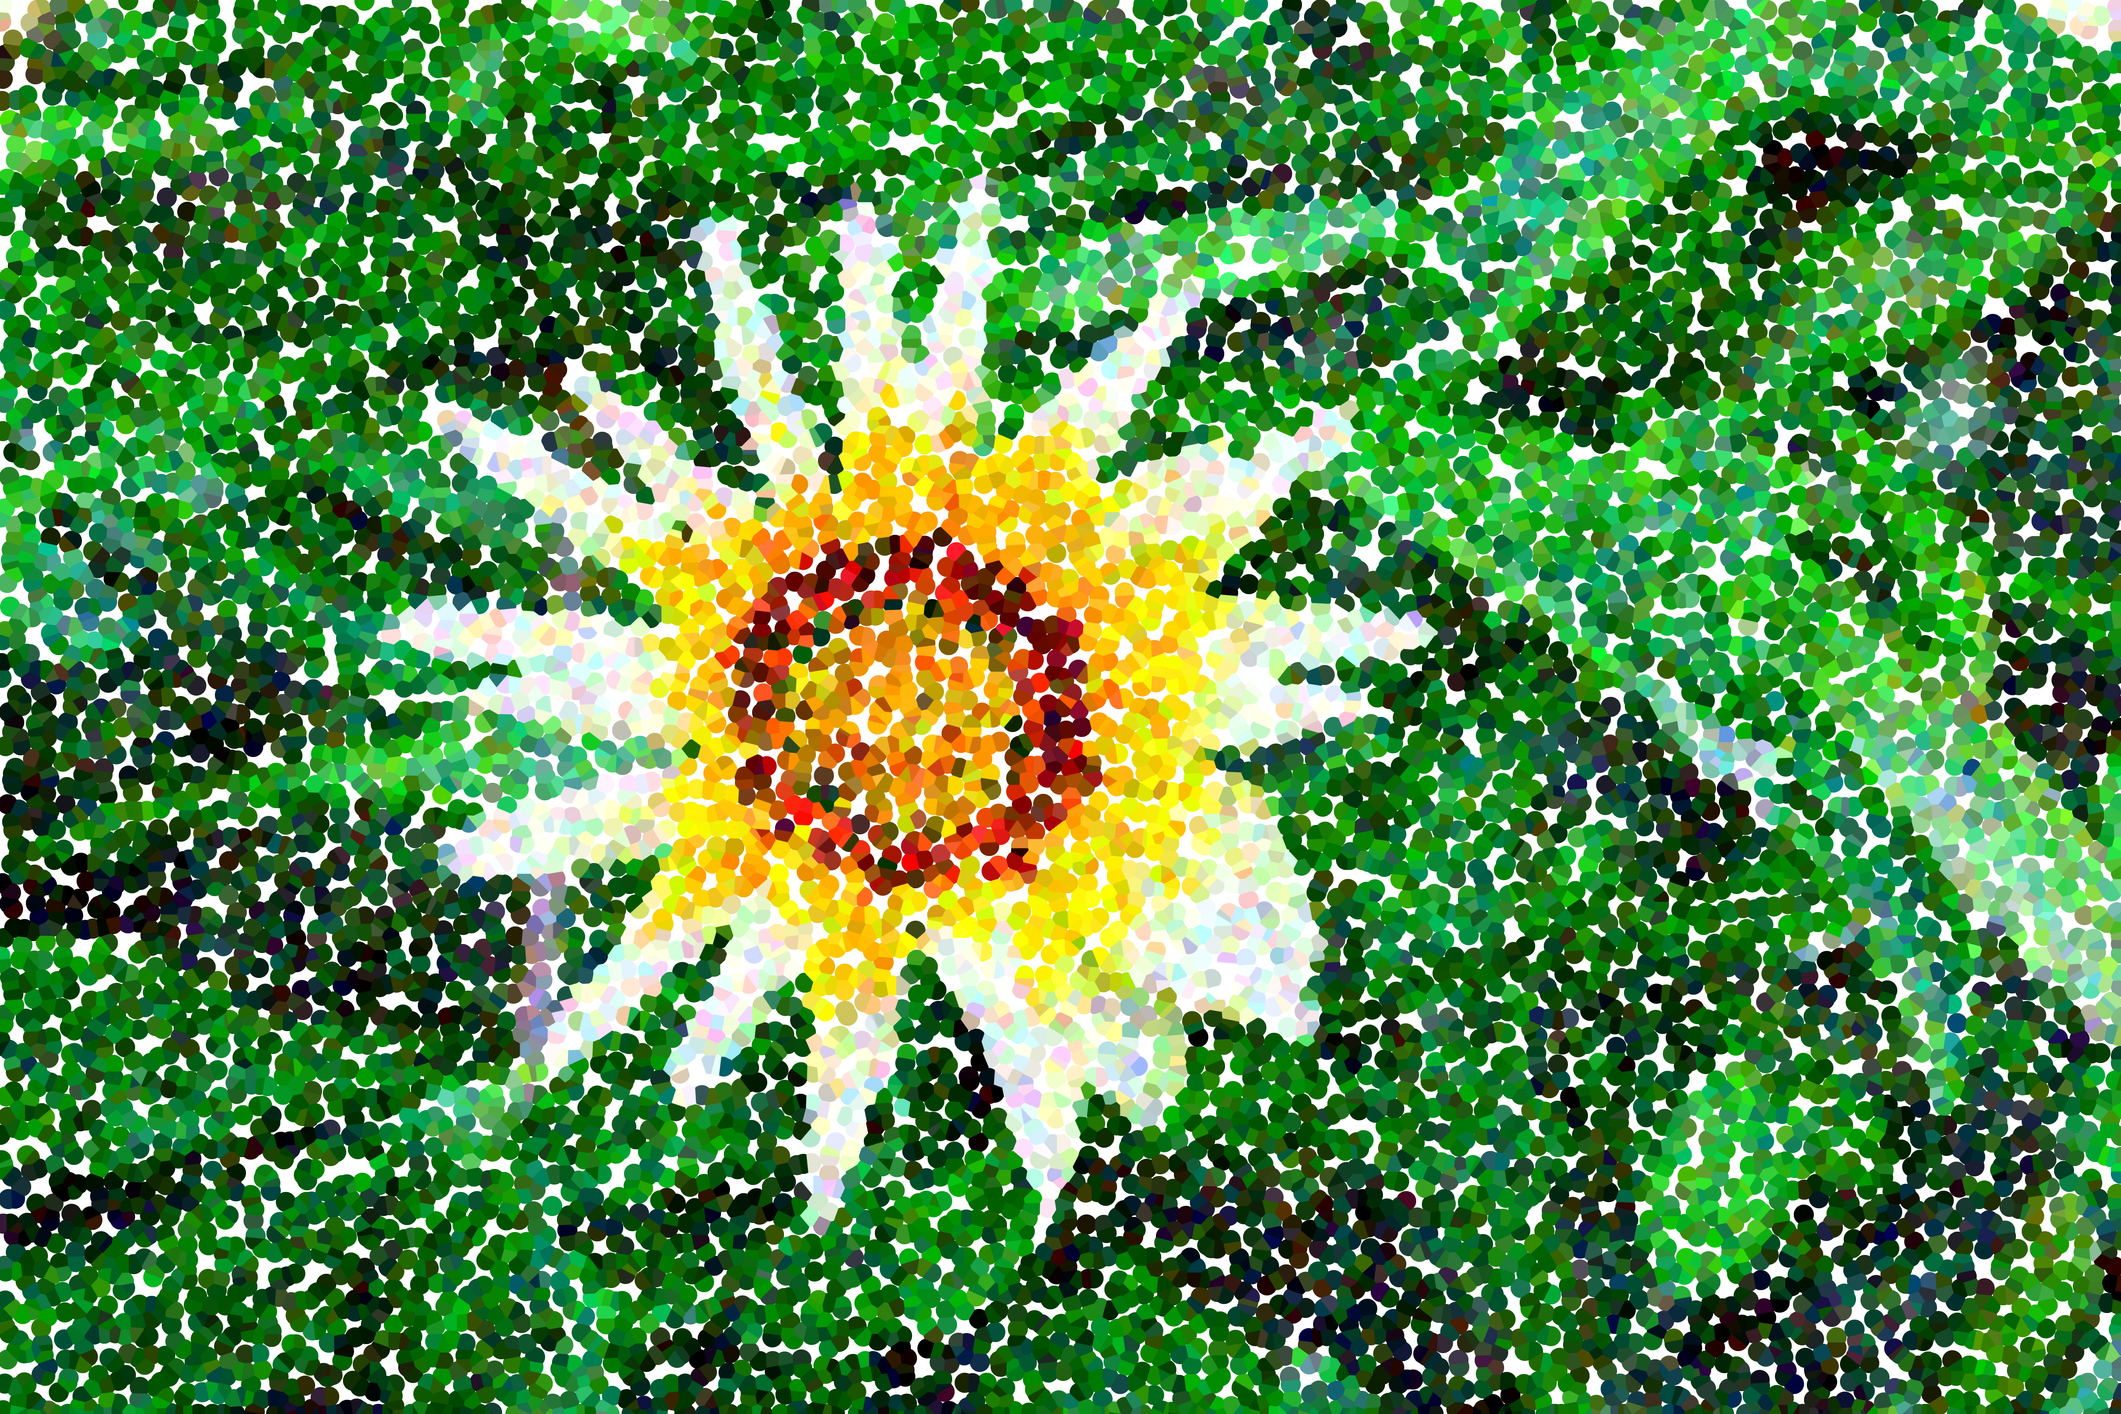 a painting of a flower made using a series of colored dots